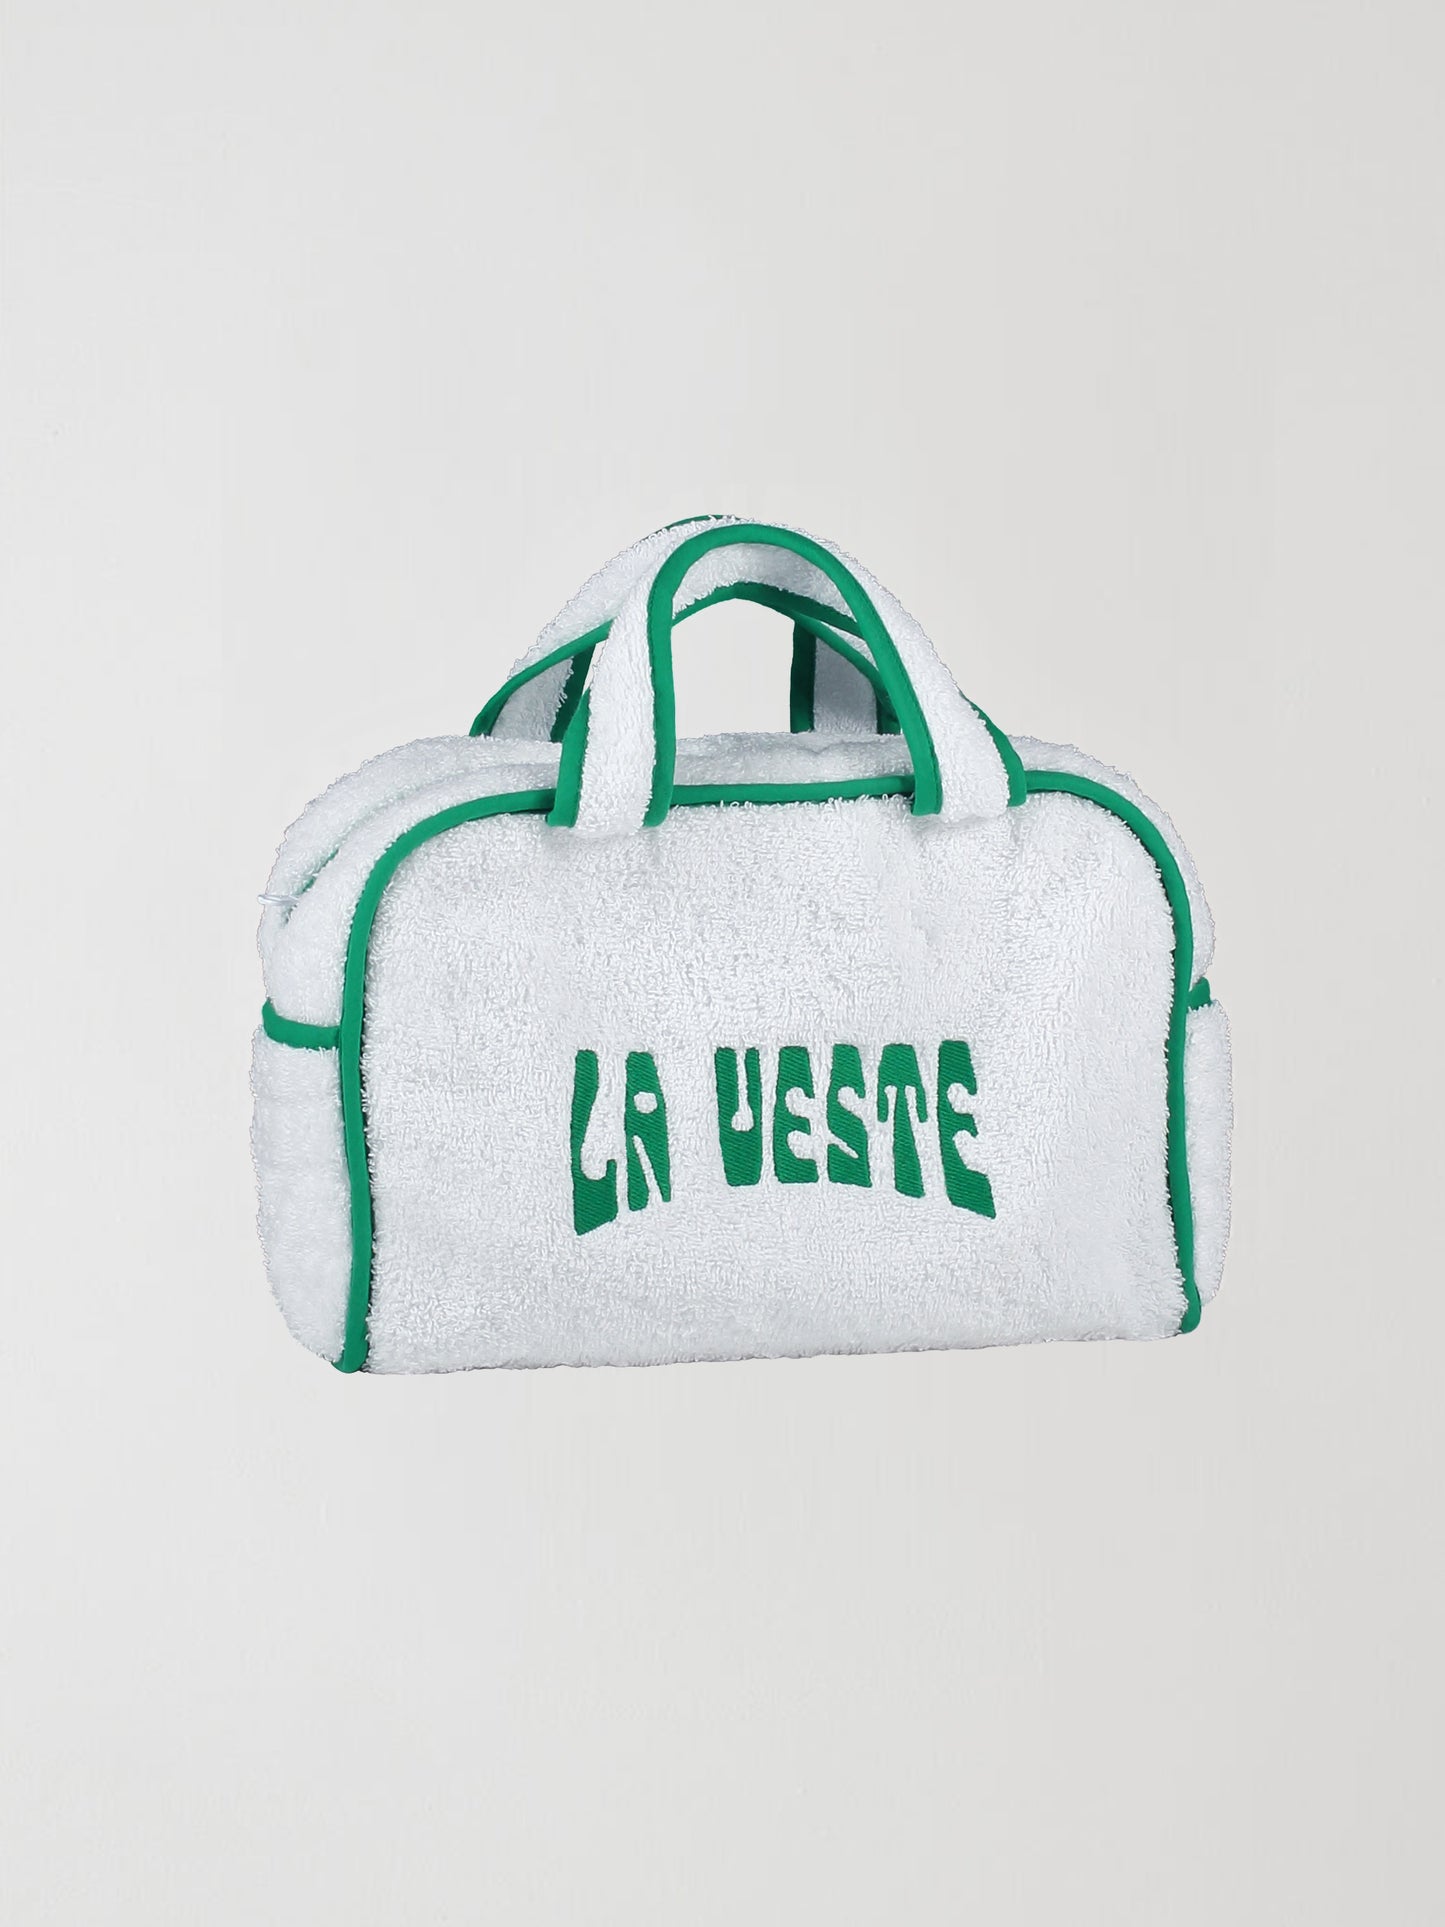 Mini Terry Towel Bag Green is a towel bag with zipper closure, green details and the La Veste logo in the same color.